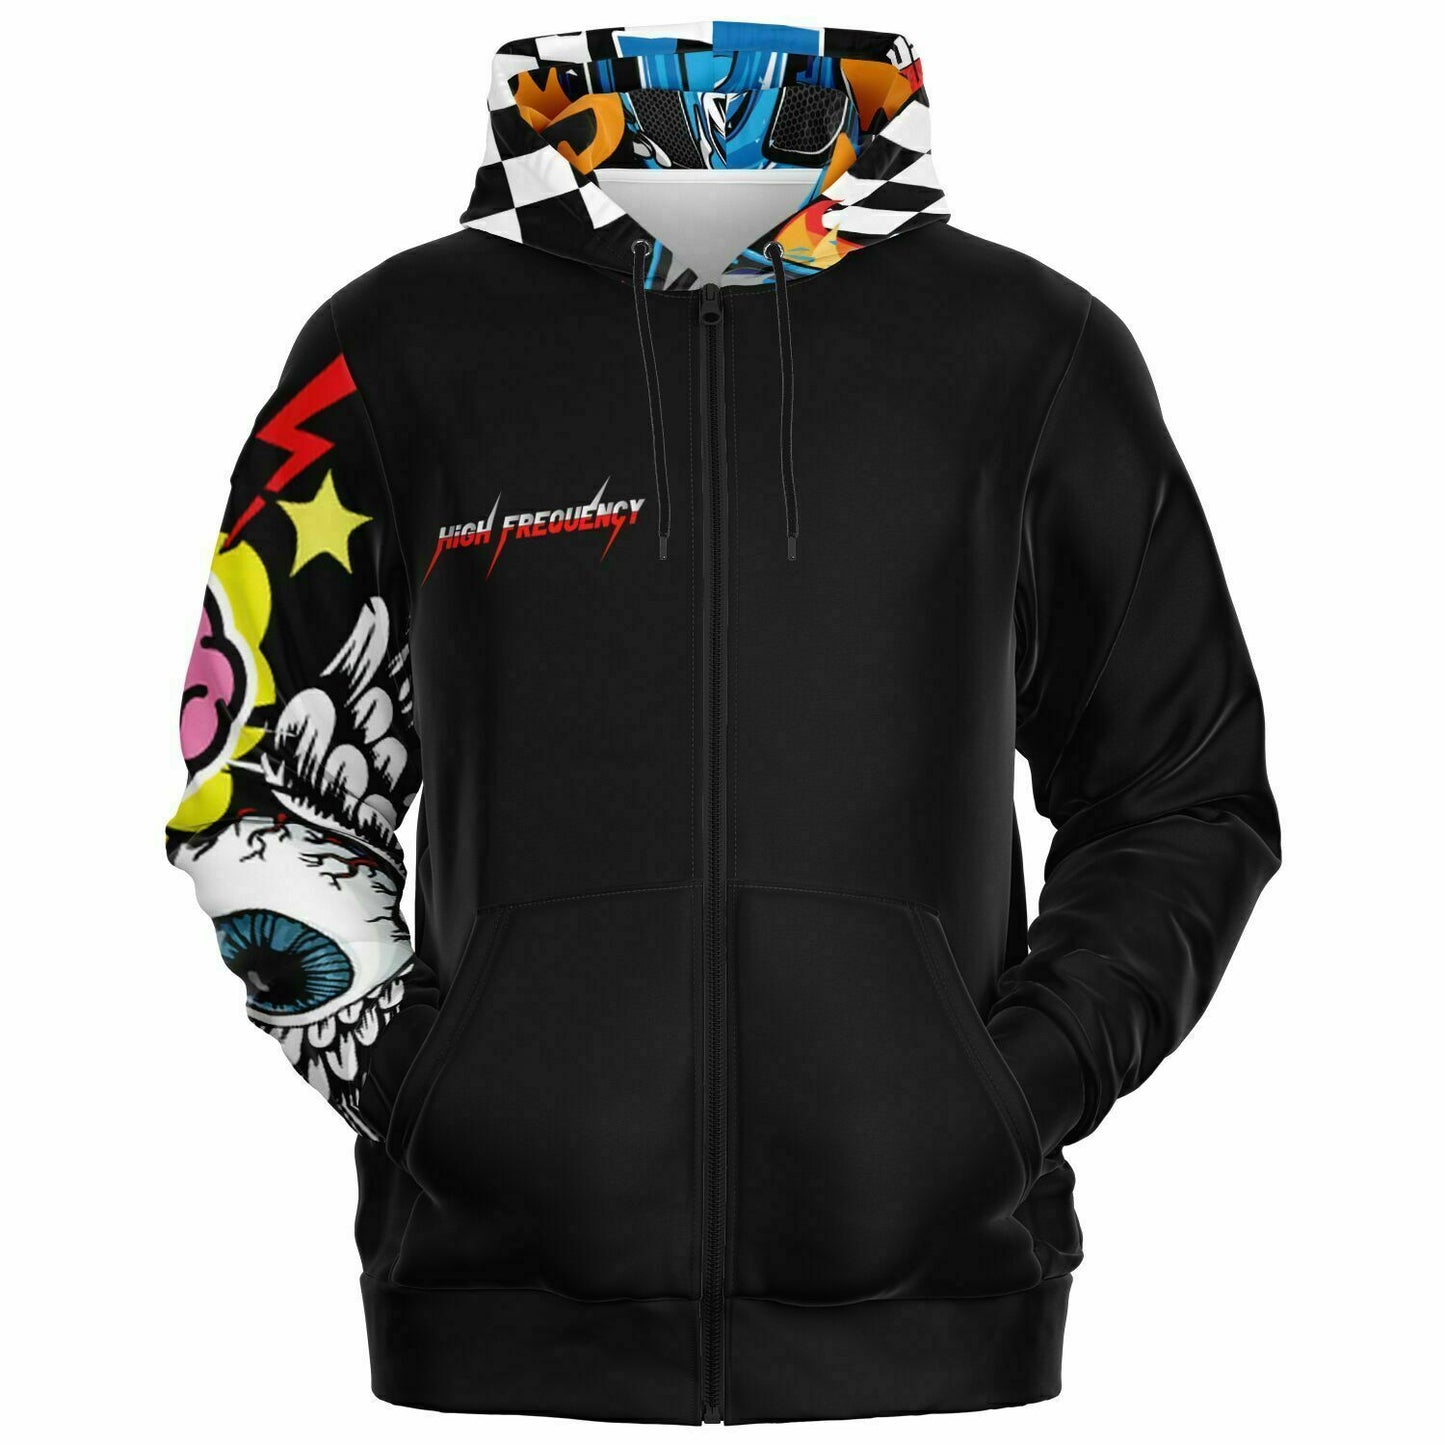 "The Racer" Graphic Black Hoodie